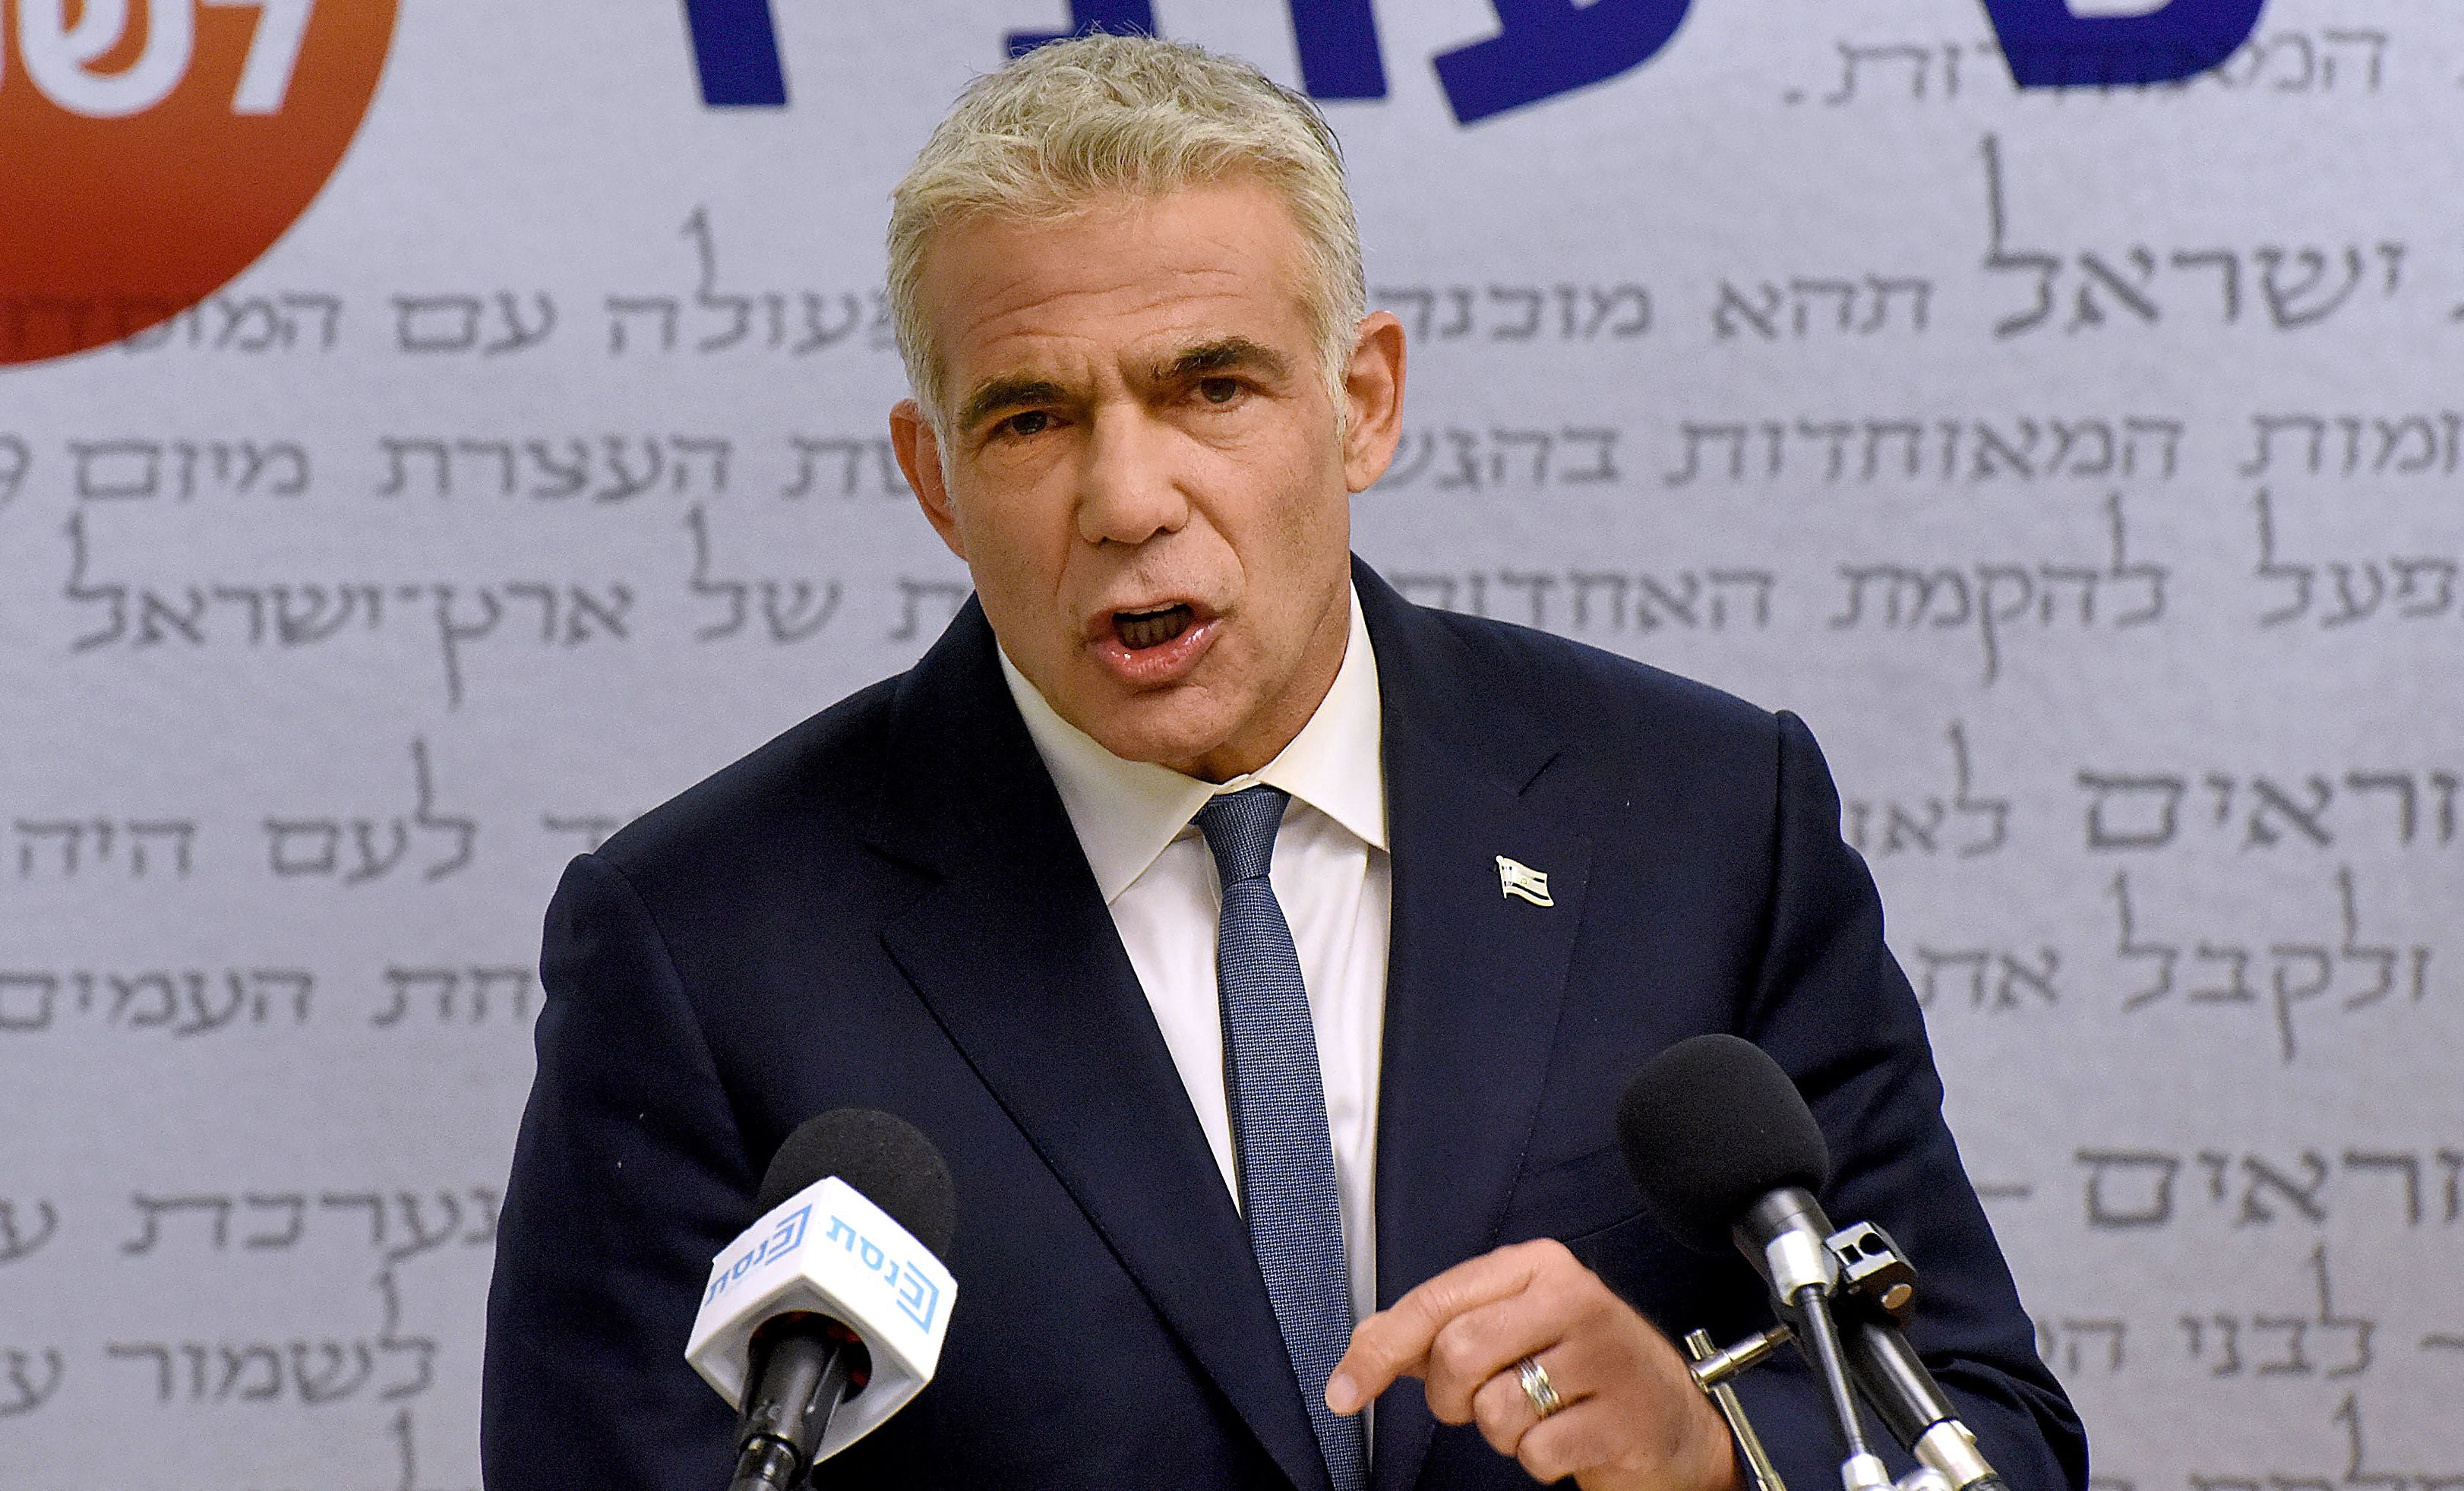 Opposition leader Yair Lapid is set to join Naftali Bennett in a proposed alliance